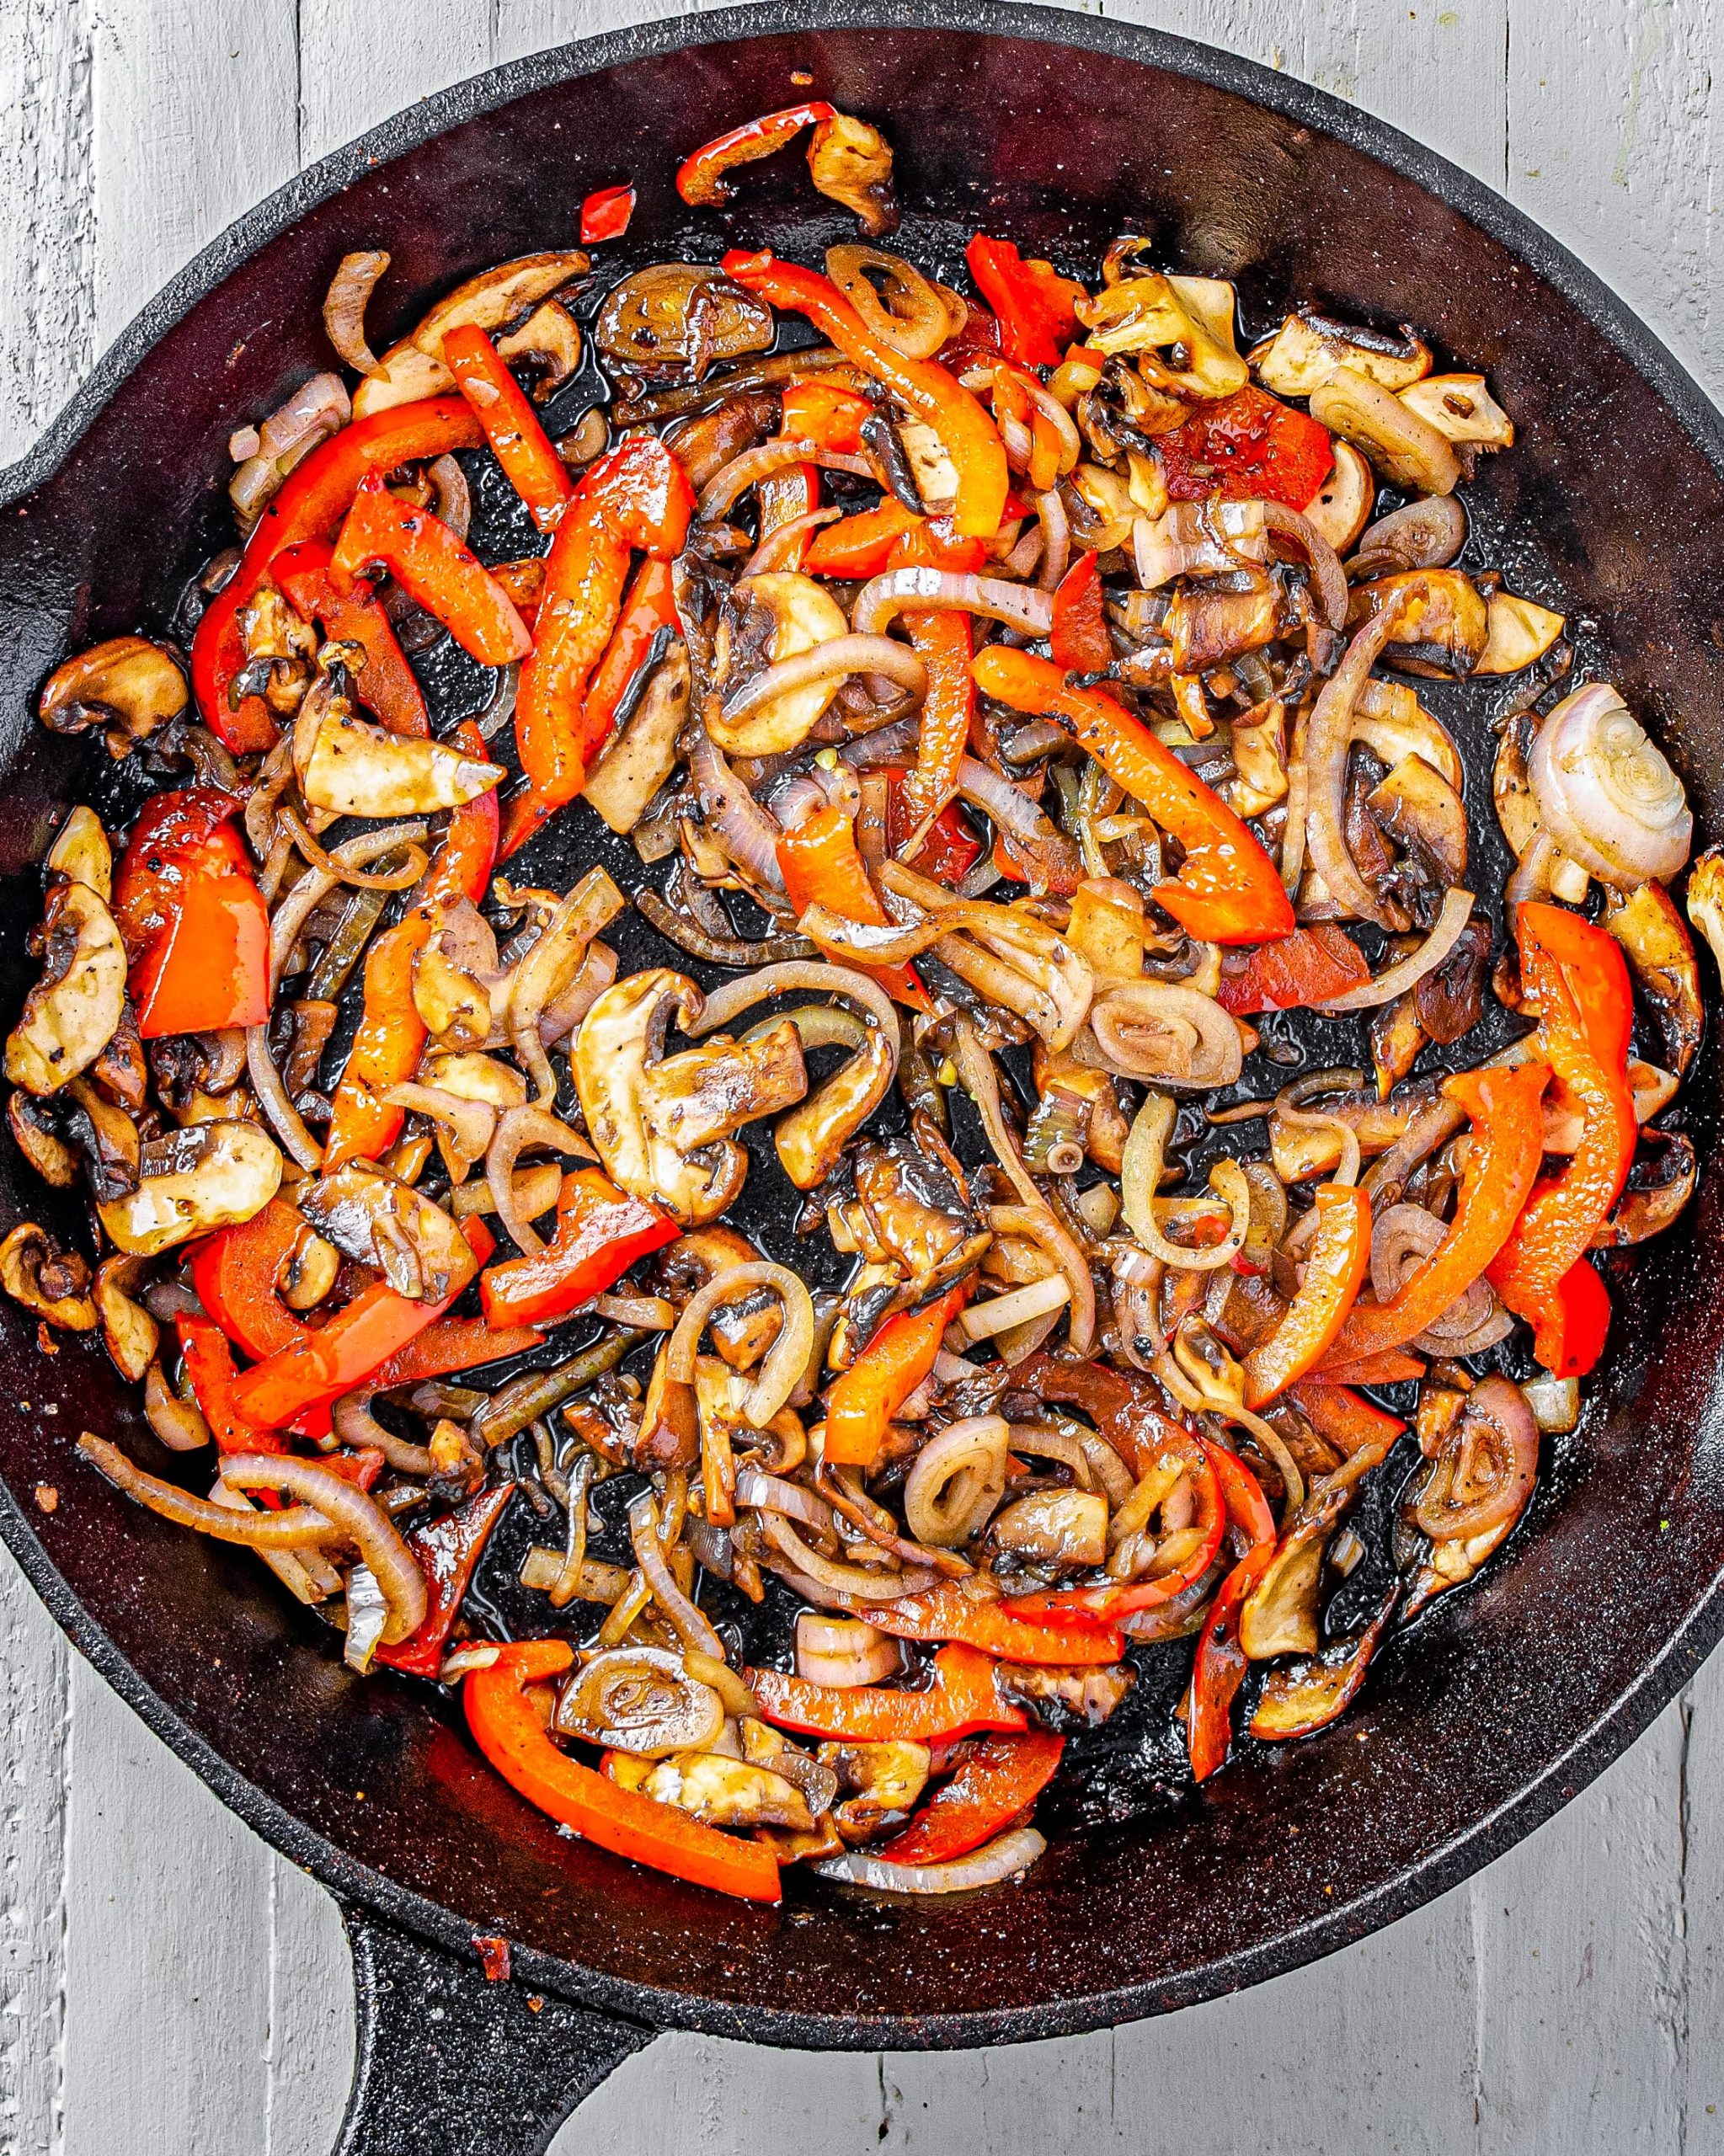 Add the mushrooms, red bell pepper, and onion to the skillet, and saute until becoming tender. 